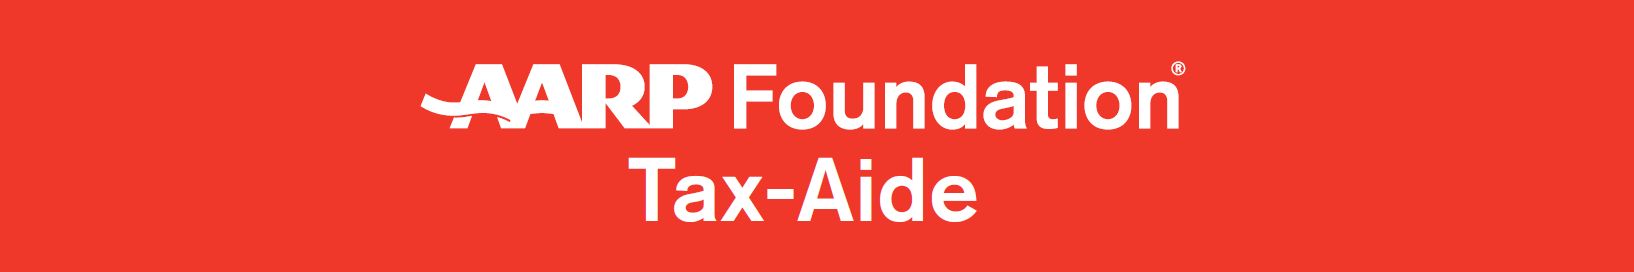 red rectangle with white text logo for AARP Foundation Tax Aide program